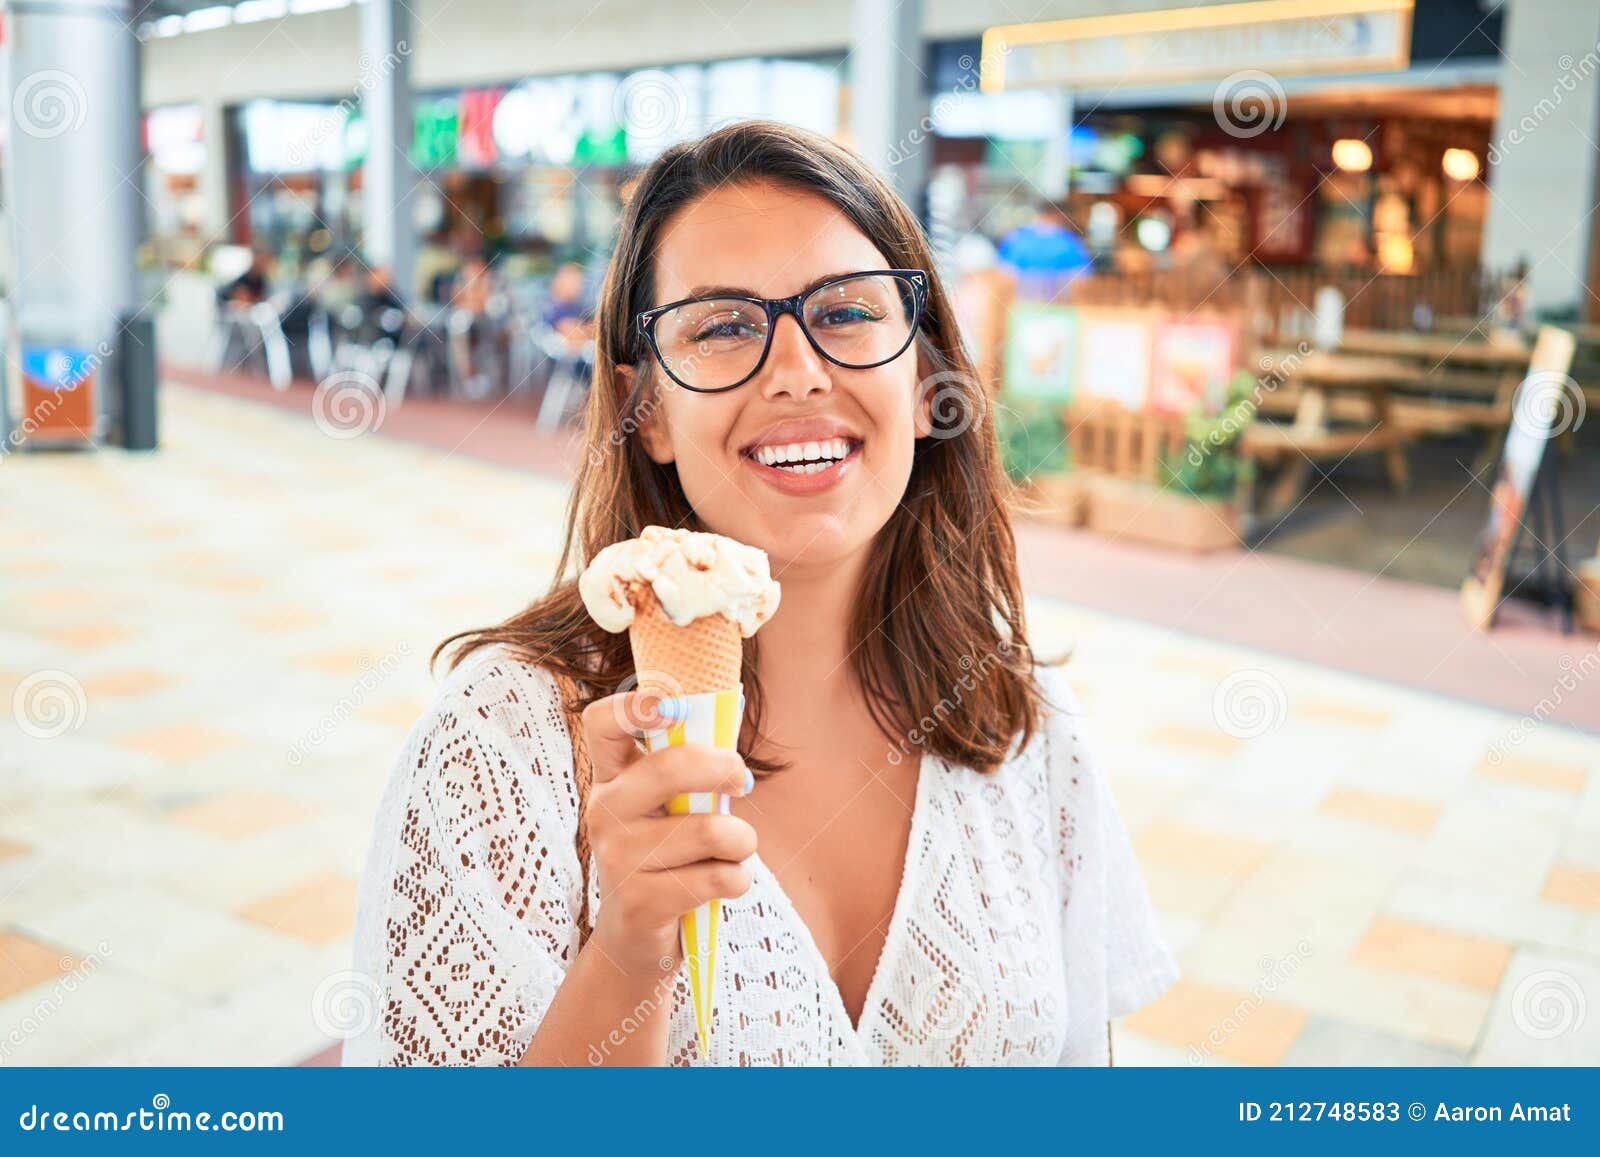 Young Beautiful Woman Eating Ice Cream Cone At The Shopping Center On A Sunny Day Of Summer On 